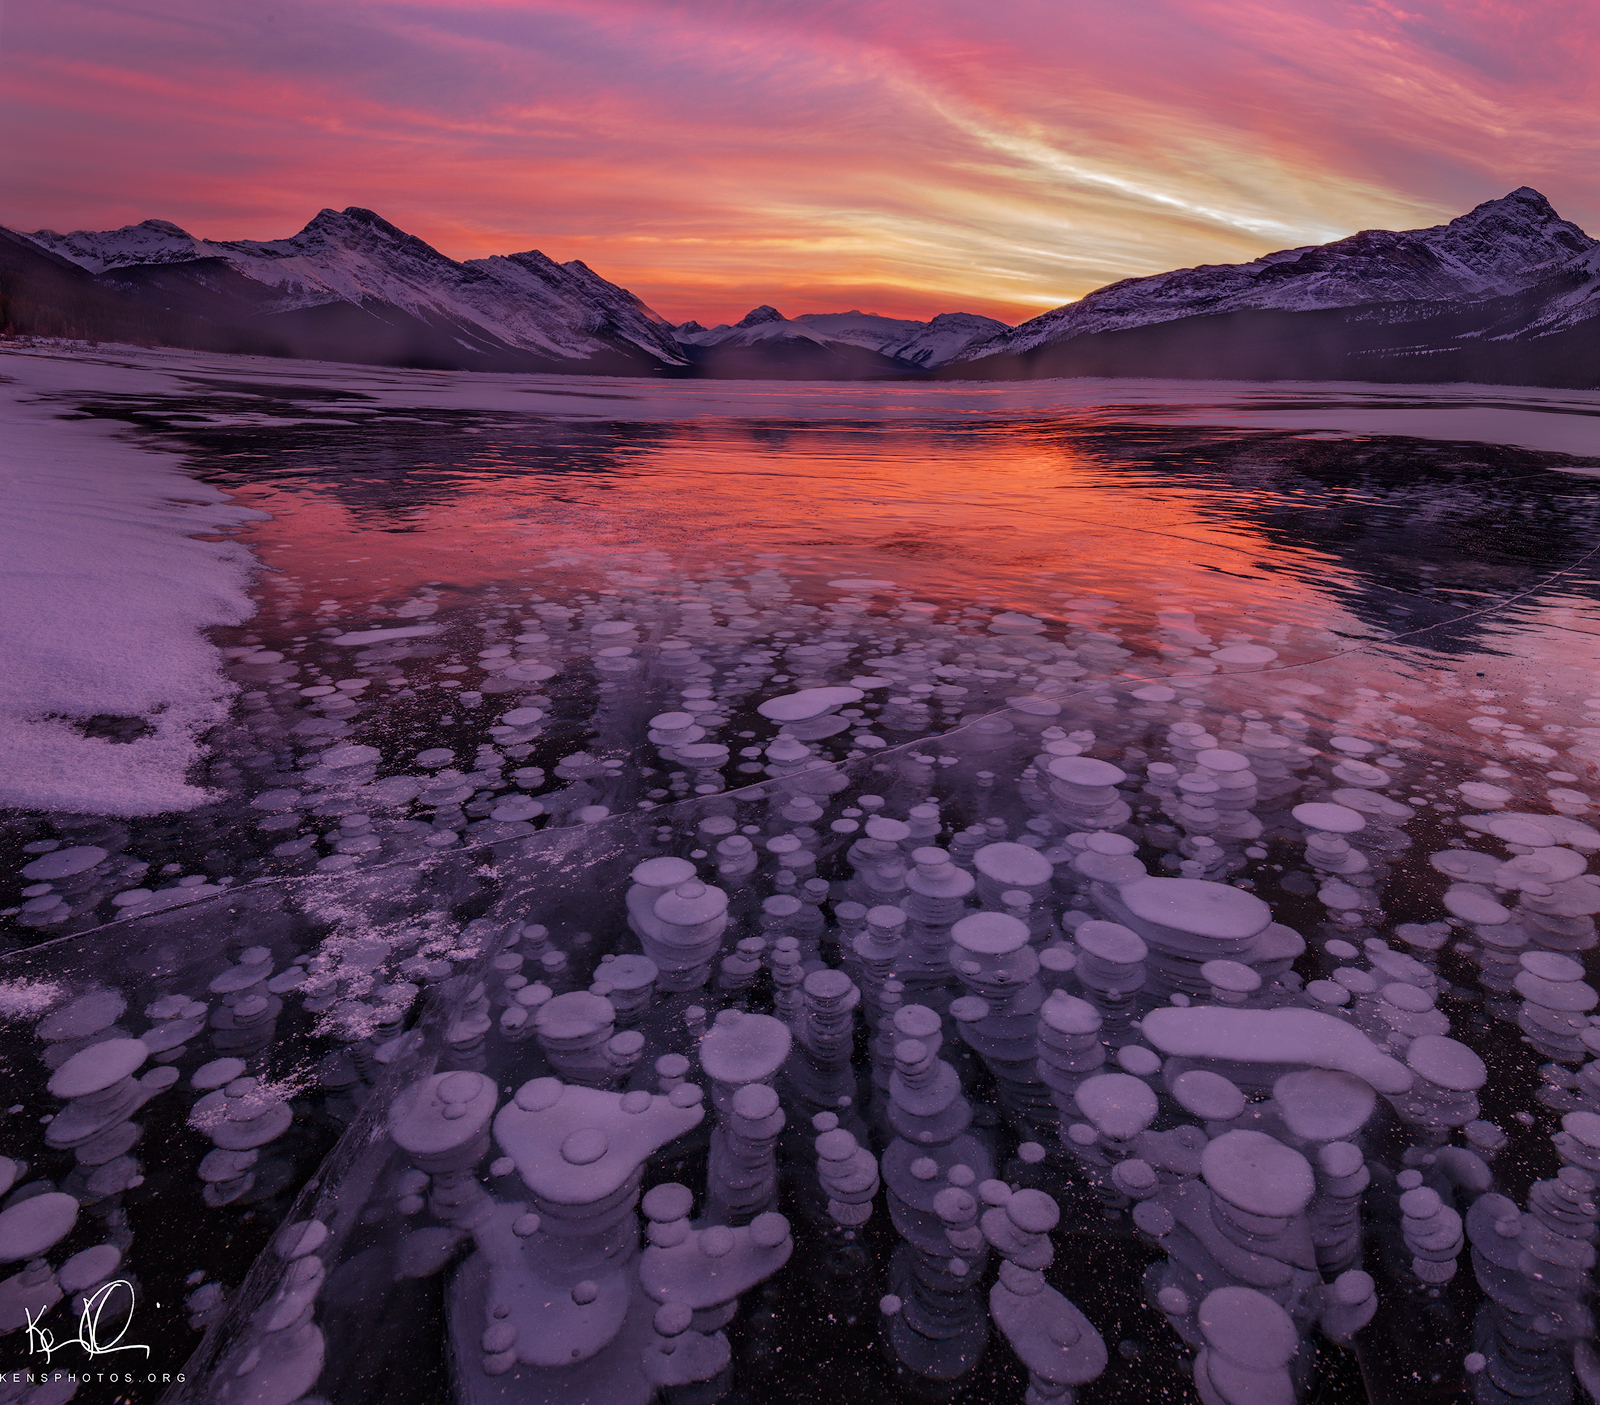   CANADIAN ROCKIES.&nbsp; &nbsp;FROZEN METHANE BUBBLES TRAPPED UNDER THE ICE. 